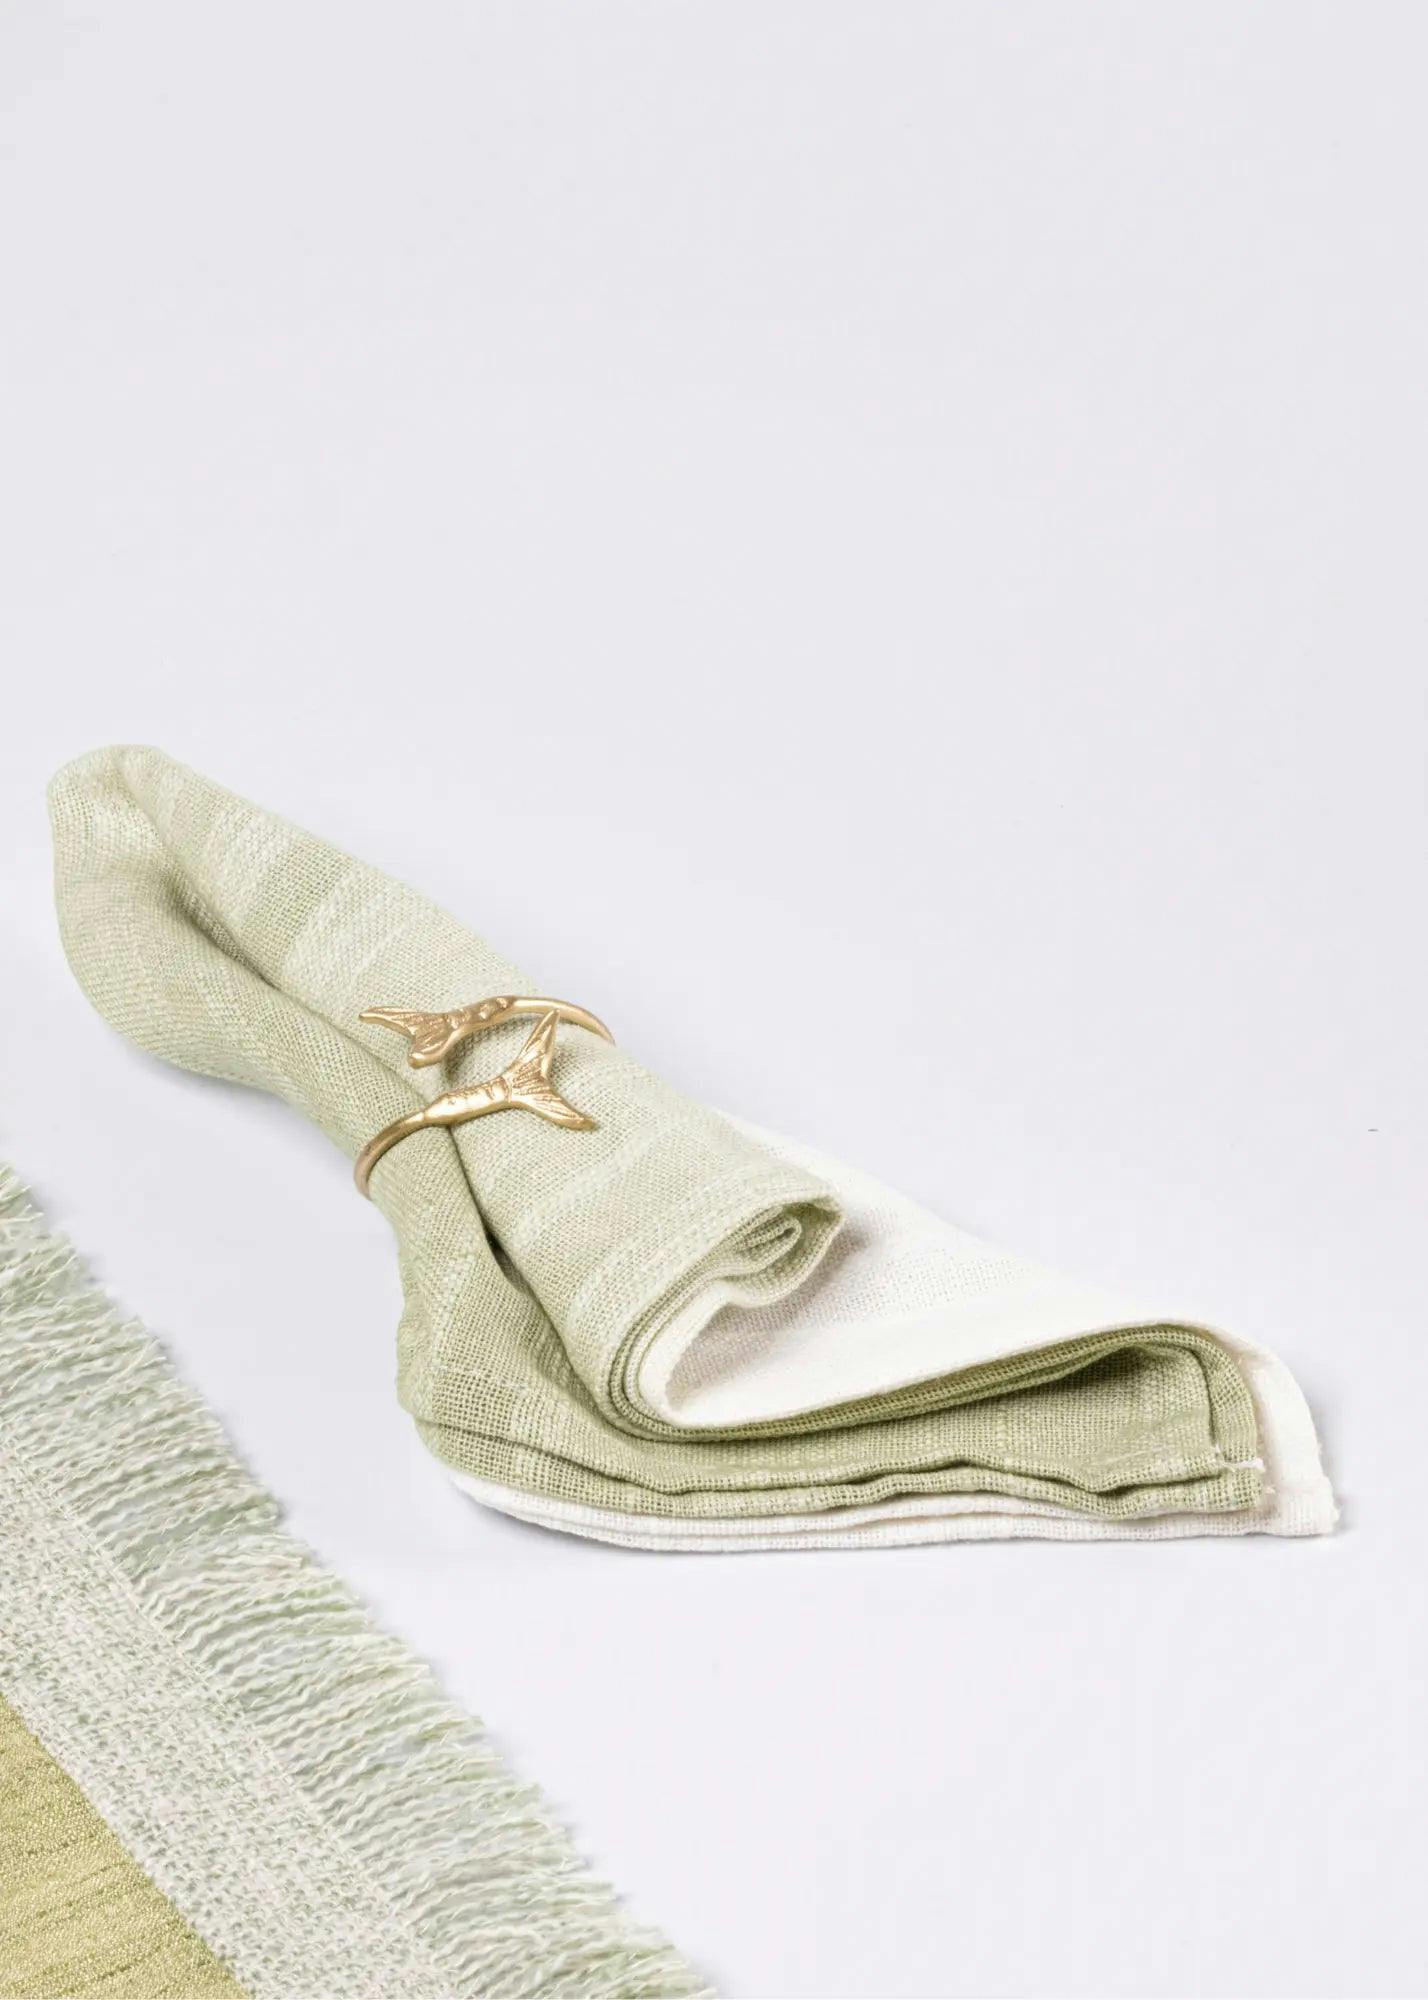 Mermaid Napkin Rings - Gold, a product by Gado Living